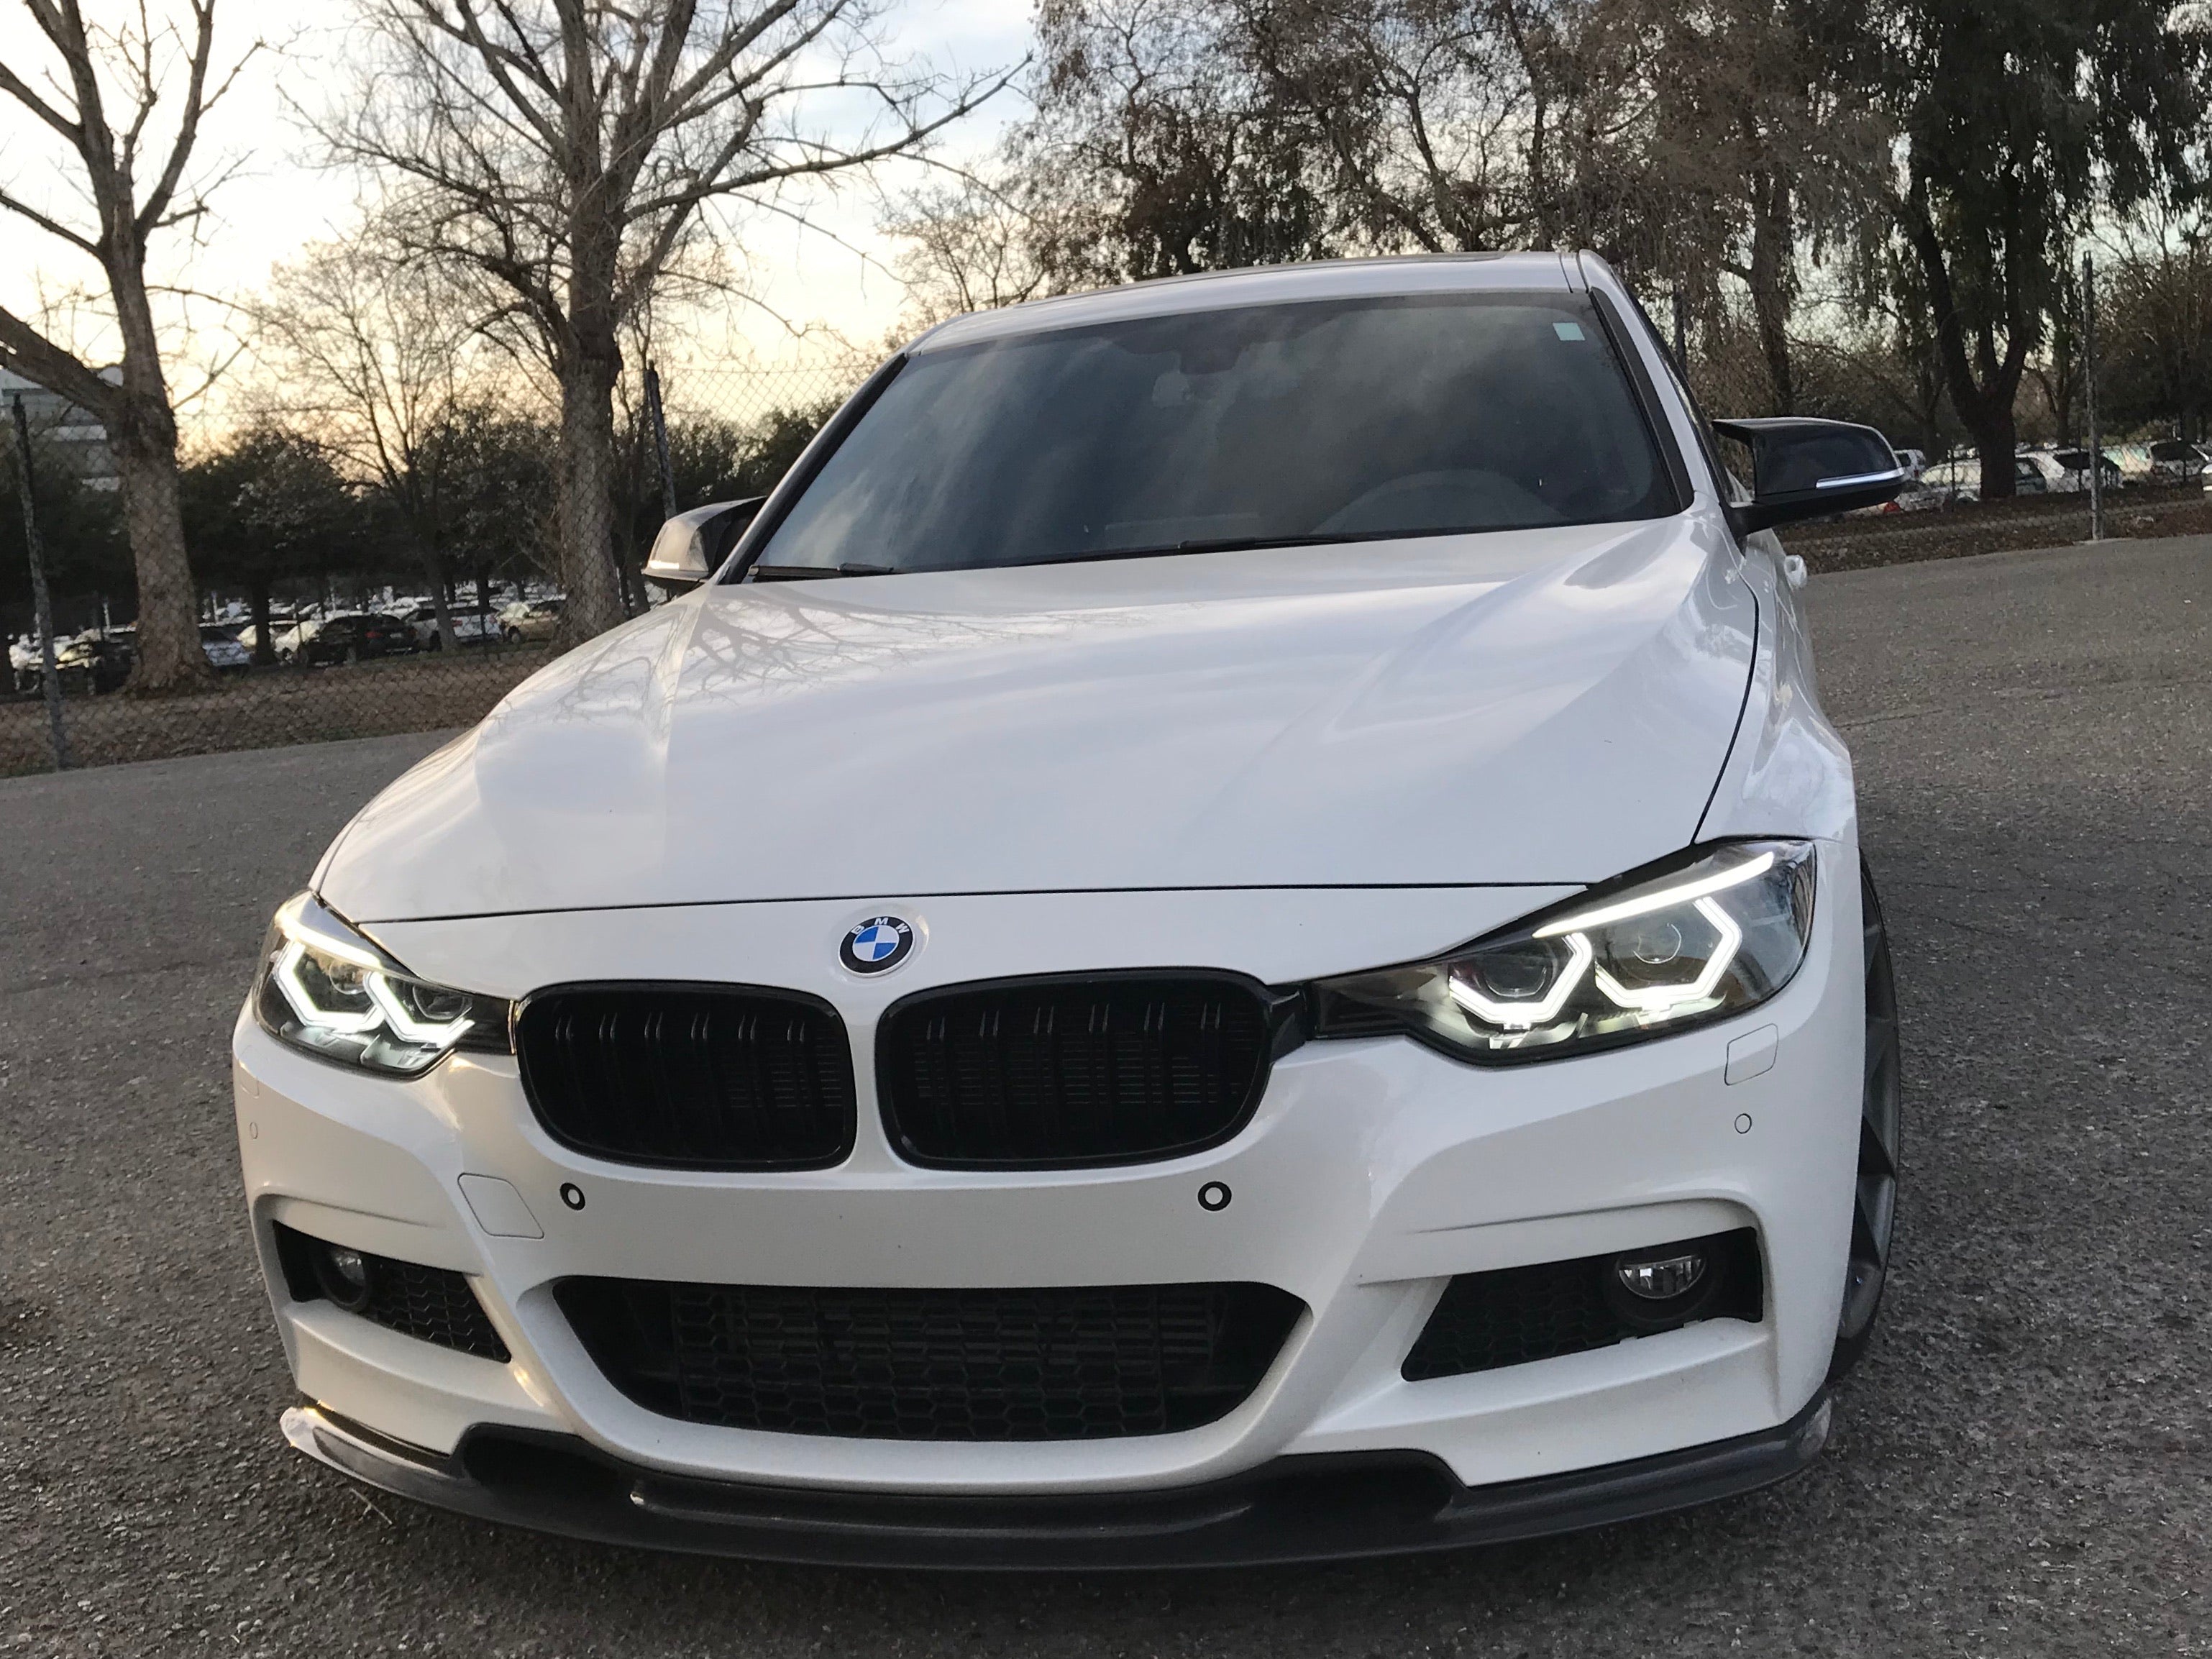 F30 3 Series Sedan Vision Headlights No Cores Required (2012 - 2018 Halogen Only)